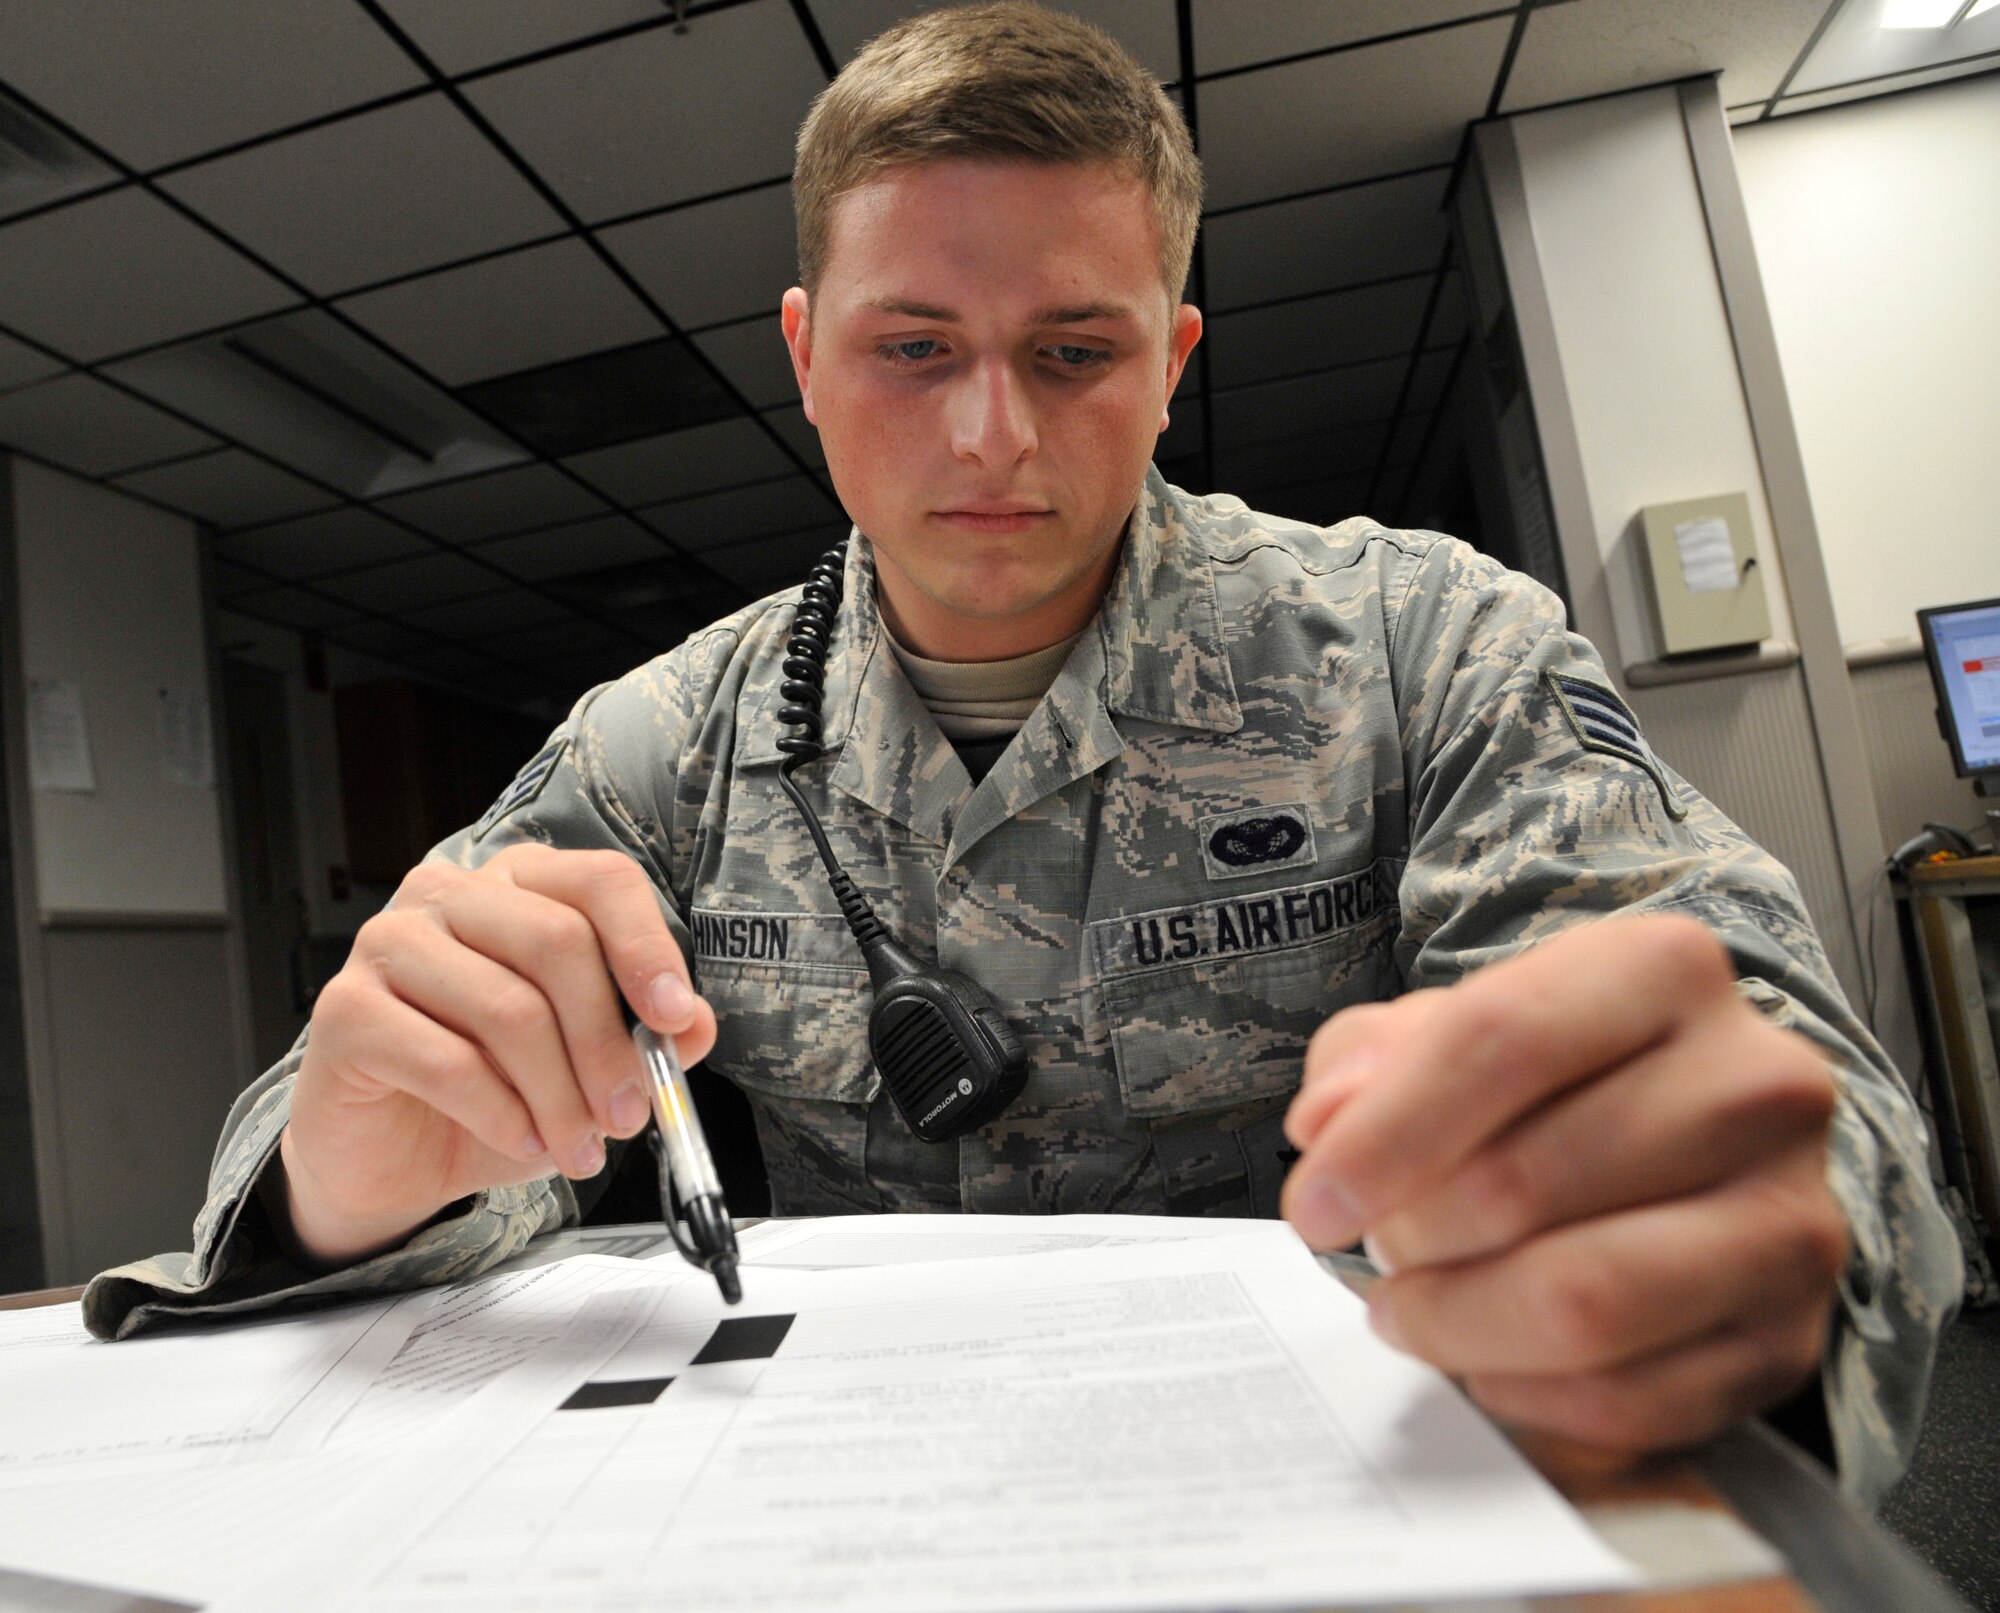 U.S. Air Force Senior Airman Matthew Hinson, 509th Security Forces Squadron patrolman, reviews daily paperwork at Whiteman Air Force Base, Mo., Oct. 8, 2014. Whenever a situation occurs around the base, the desk Sgt. will alert patrolmen and dispatch to the location where situation is occurring. (U.S. Air Force photo by Airman 1st Class Keenan Berry/Released)